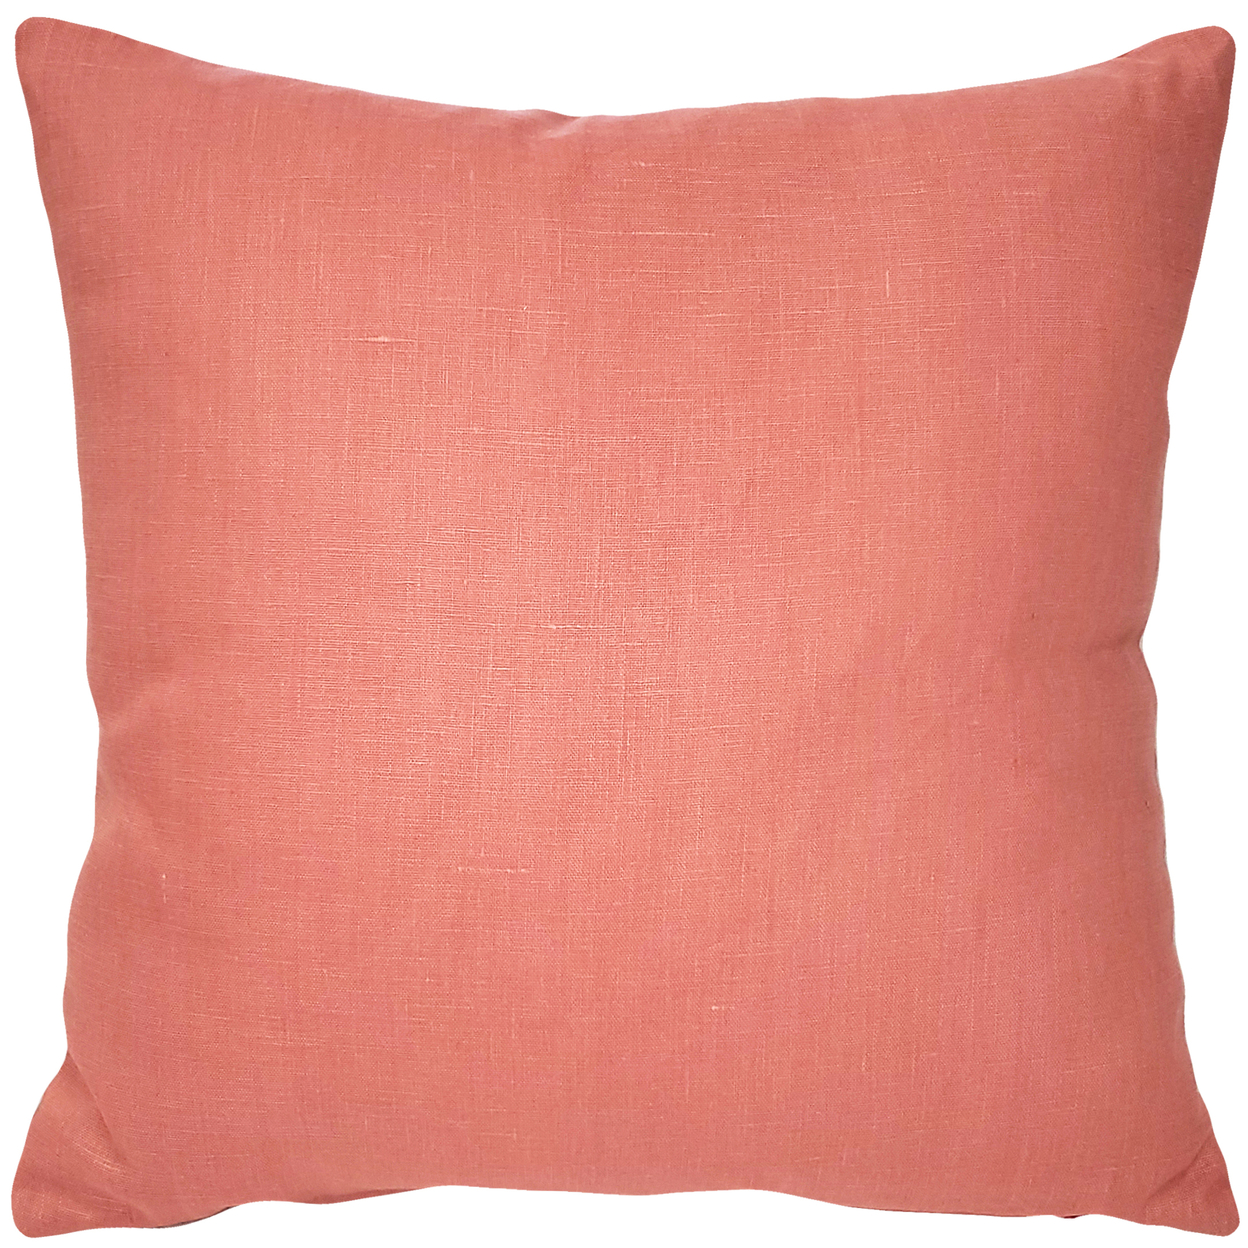 Tuscany Linen Deep Blush Throw Pillow 20x20, With Polyfill Insert